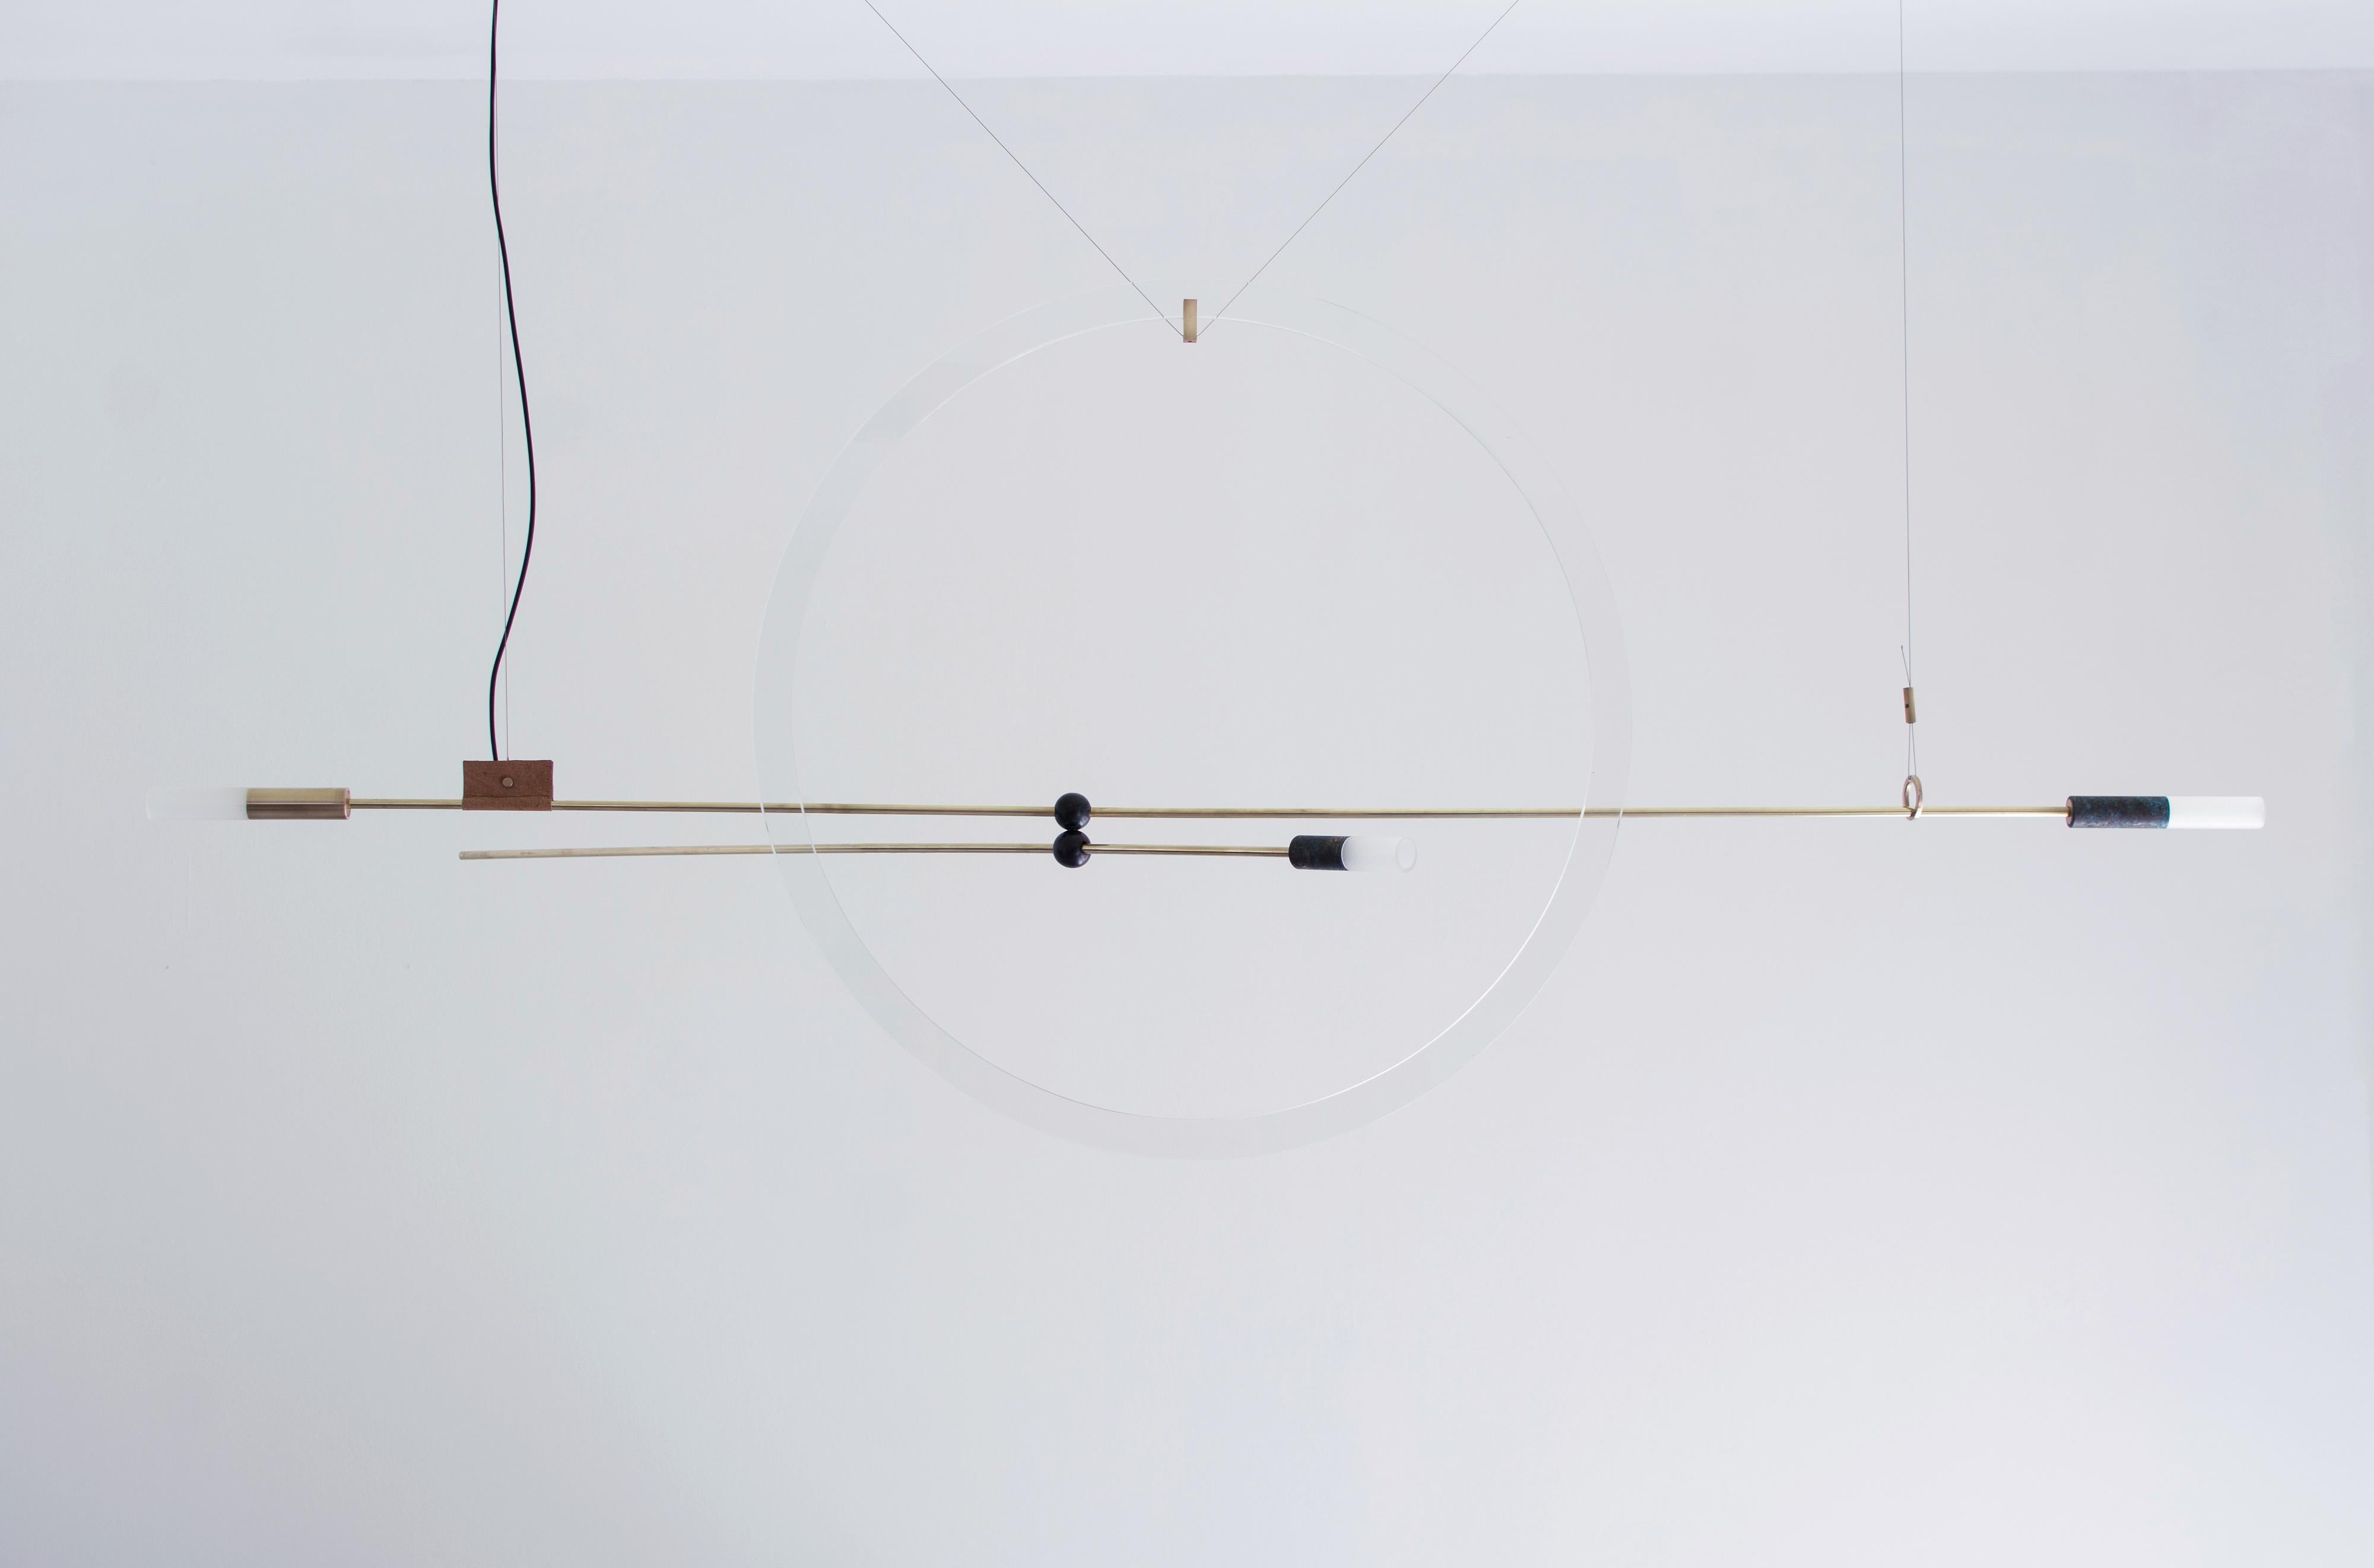 Brass sculpted light suspension 'Opus xi', Periclis Frementitis

Materials: solid brass (aged and polished), bronze parts, handcrafted glass, handcrafted
leather, acrylic parts, 12V LED

Dimensions: W 160 cm x H 65 cm x D 80 cm
Due to the